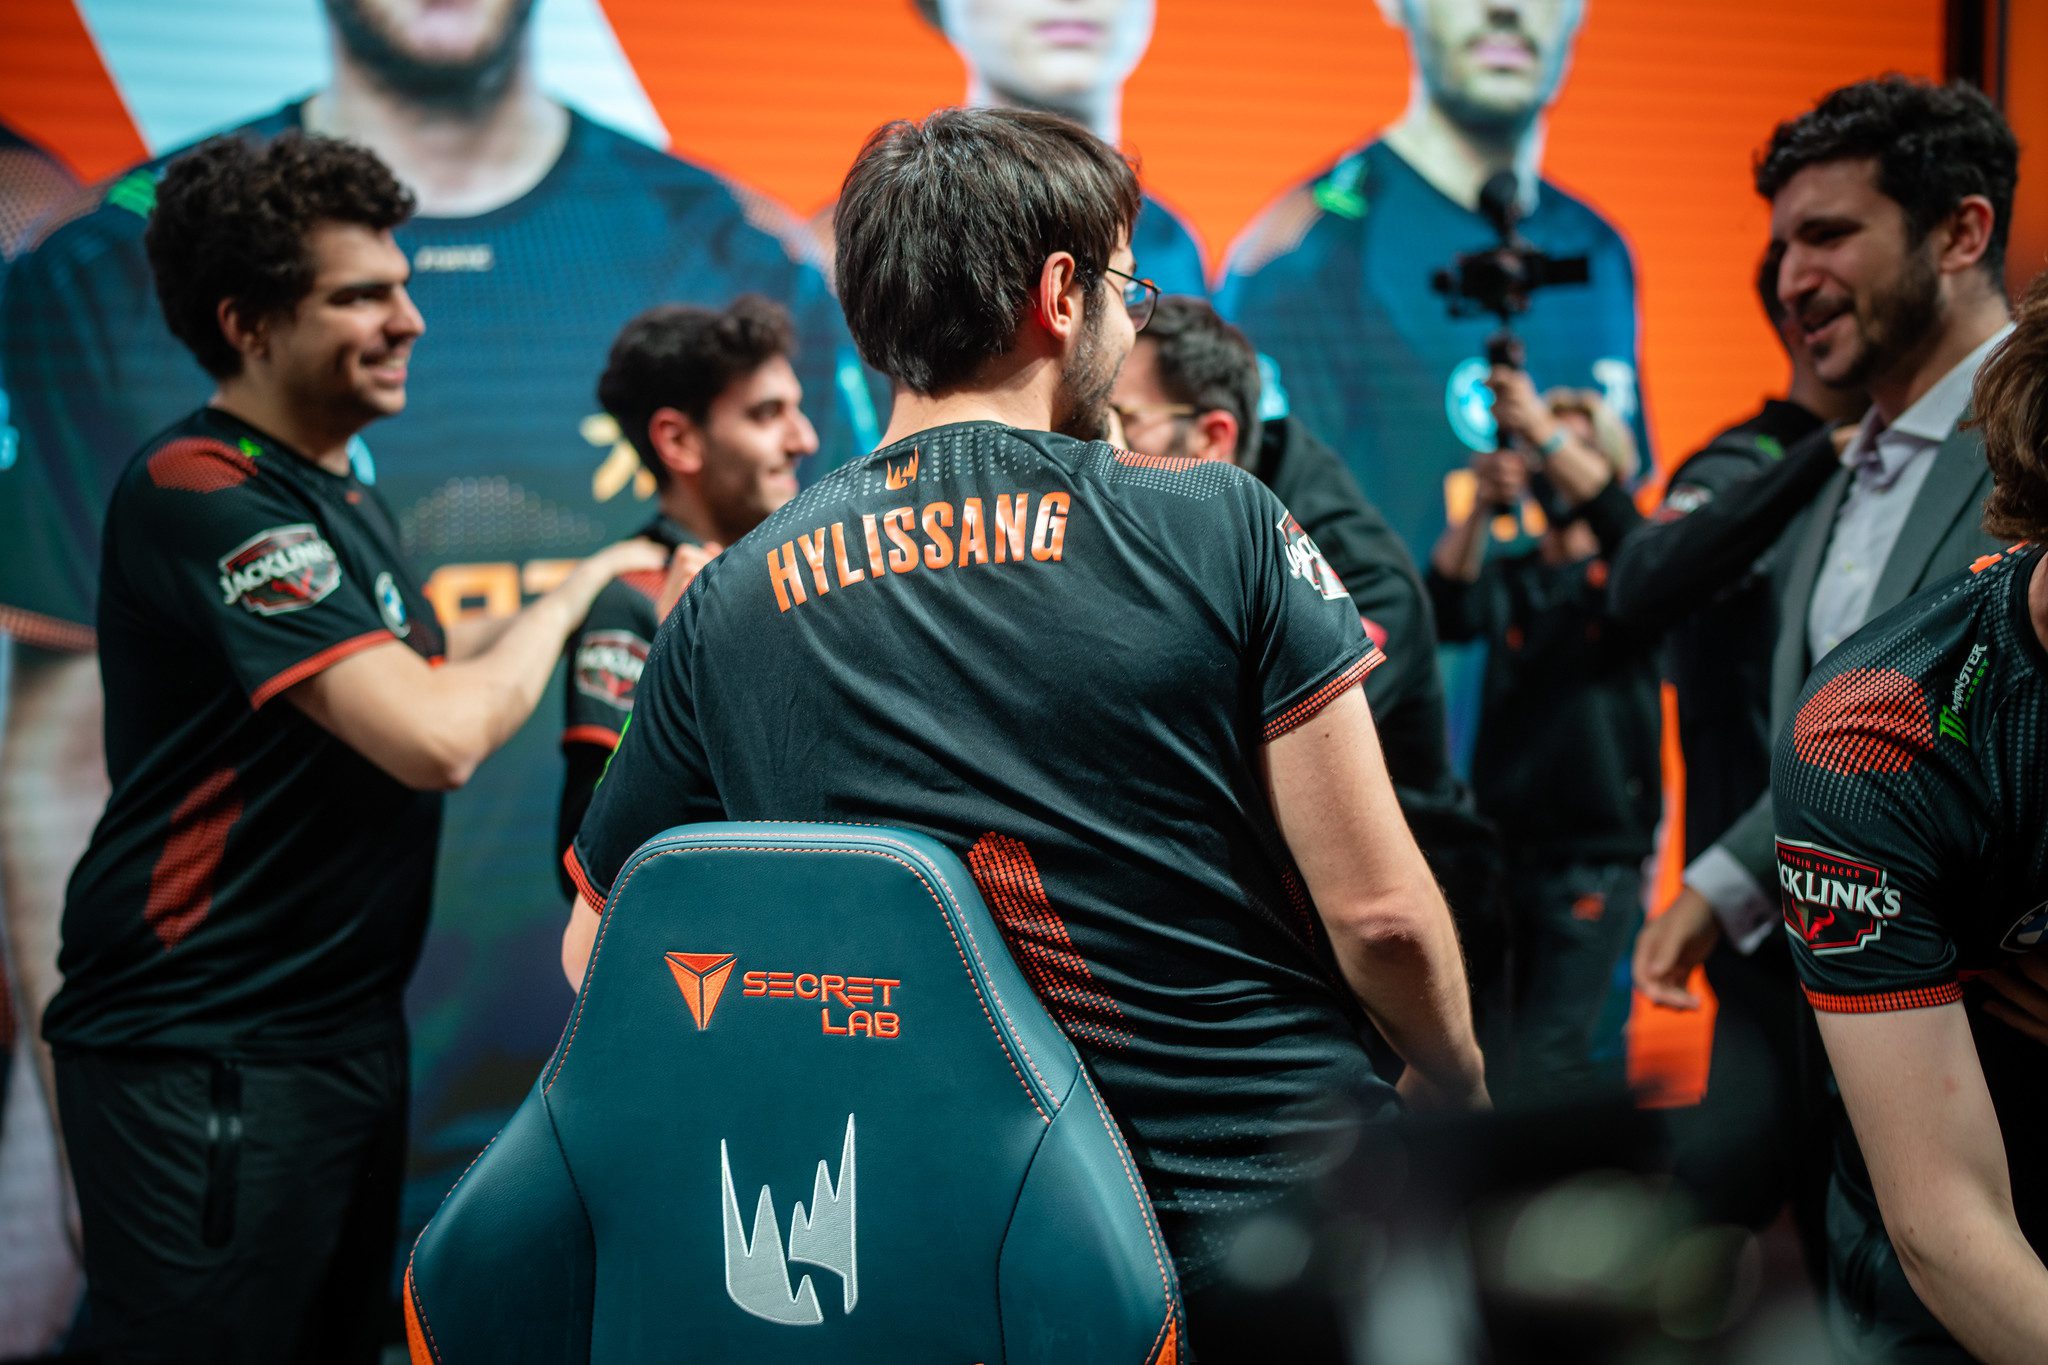 Fnatic have never been afraid of being creative in champion picks, such as Hylissang's infamous Pyke pick